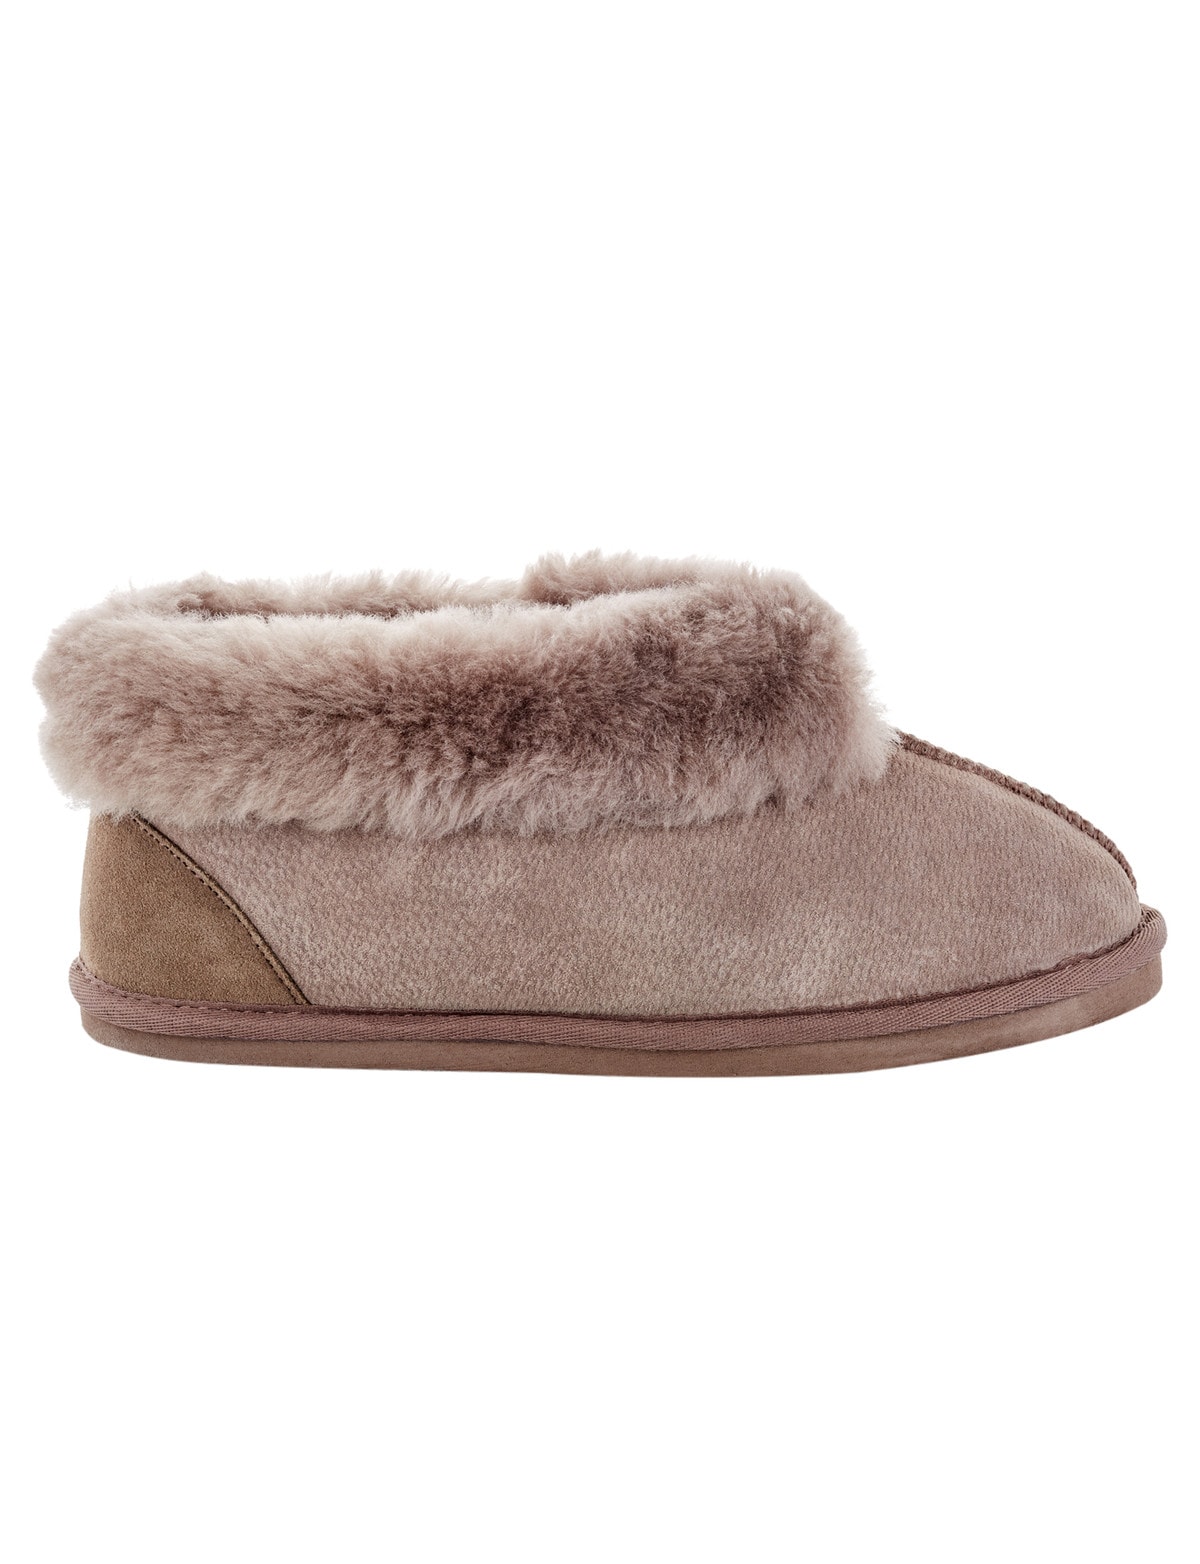 Buy Lounge Slippers | Shearling Mittens and Boots Online | Shop Sandal